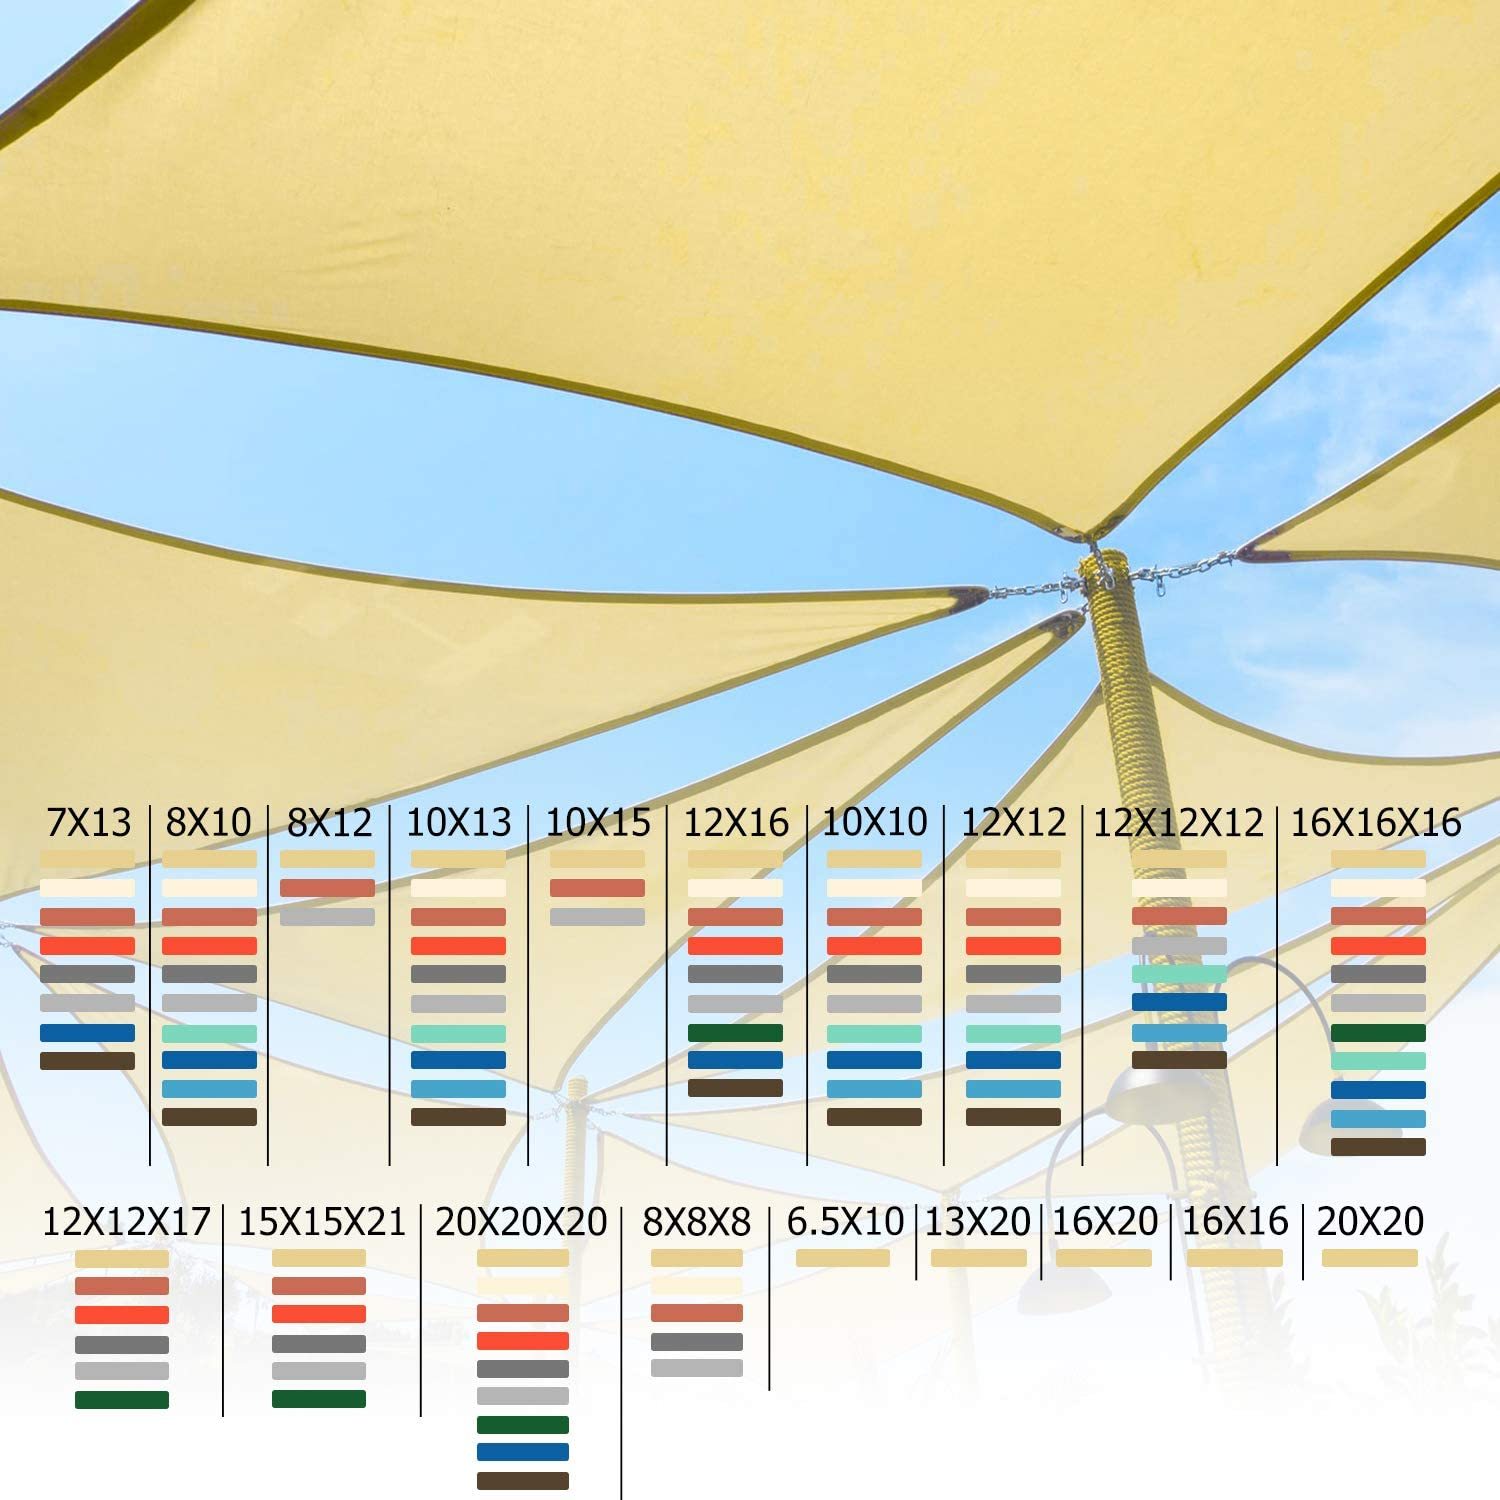 How to Install a Shade Sail?